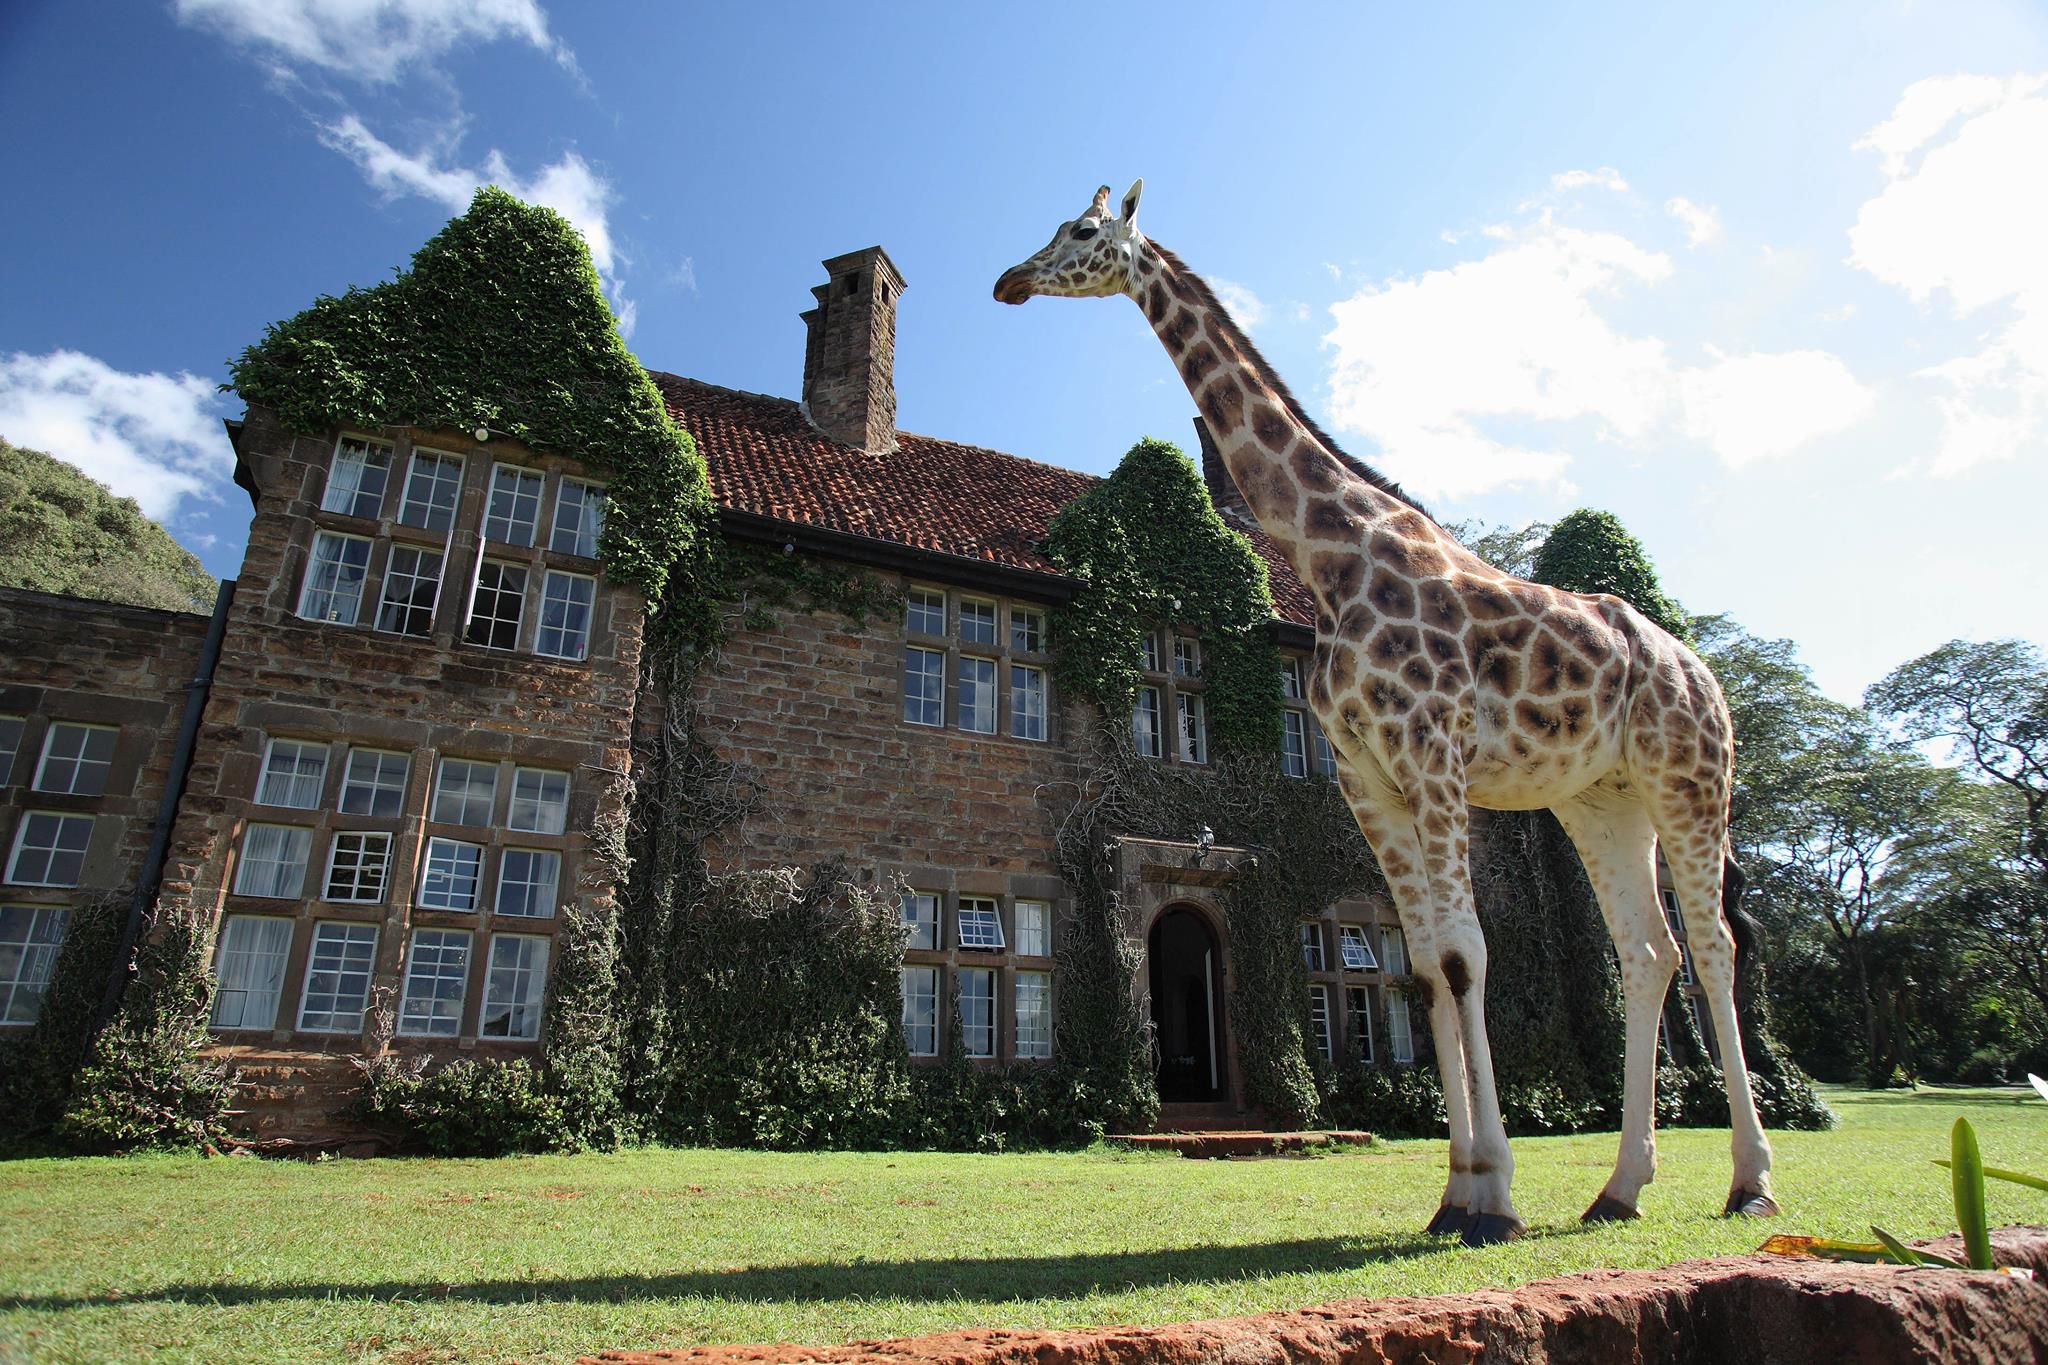 <p>Instagram’s #bucketlist hotels are destinations in themselves. Top of the list is Giraffe Manor, “<a href="https://www.thesafaricollection.com/properties/giraffe-manor/">one of the most instagrammed properties in the world</a>.” If you’ve read about Pig Beach, you know what to expect from Giraffe Manor: free-roaming giraffes, not averse to poking their heads into the hotel windows.</p><p>Travel may be limited for a while yet, but you’ve got to have a <a href="https://www.budgetdirect.com.au/blog/5-retrofuturistic-tourism-ideas-that-never-were.html">dream</a> to have a dream come true. As these destinations show, Instagrammers have plenty of ideas about must-visit places to reach in their lifetime. What locations are on your #bucketlist?</p>